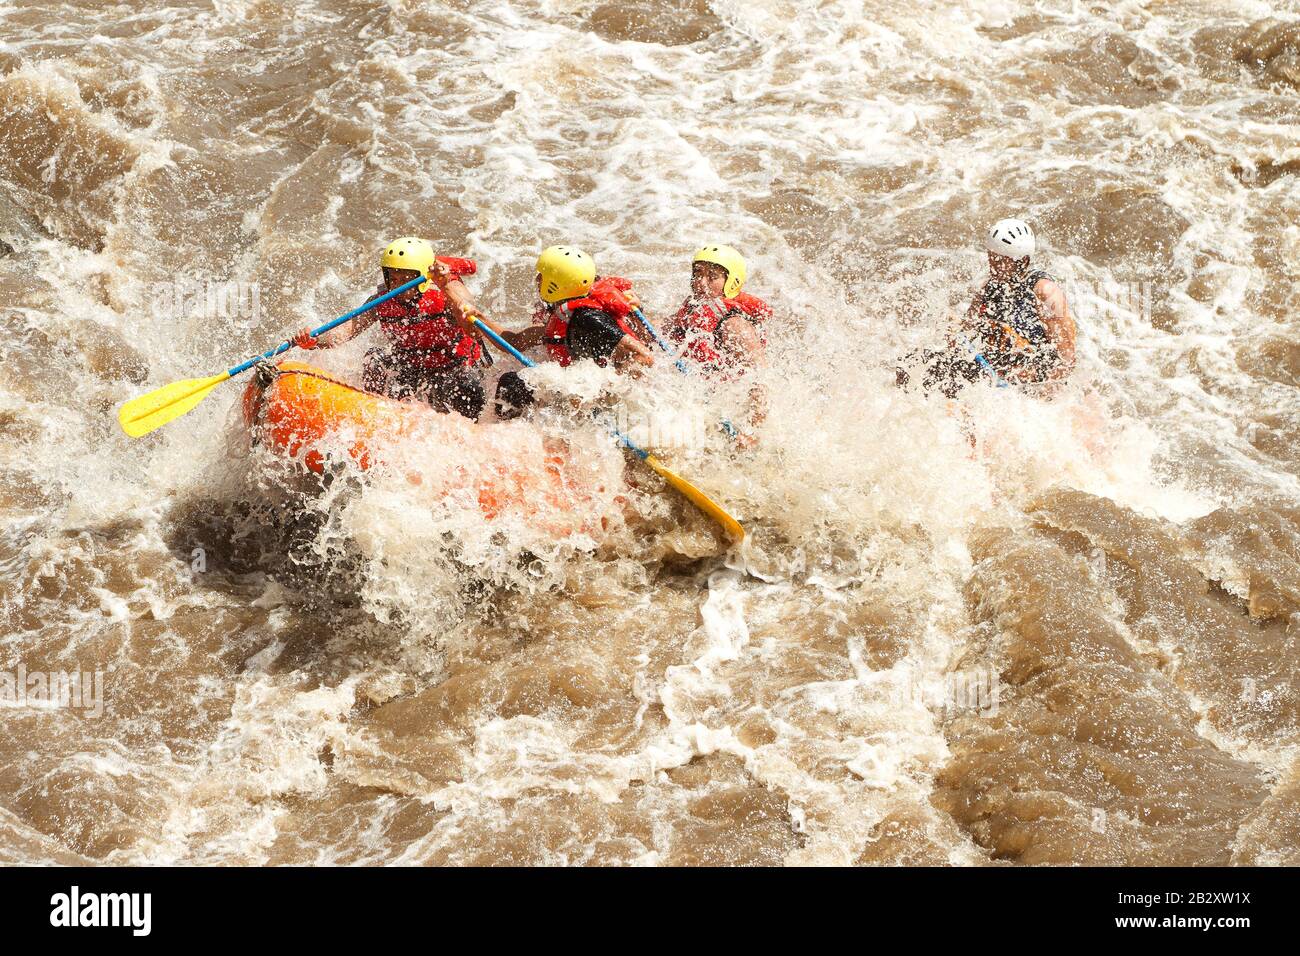 Crowd Of Mixed Mountaineer Men And Lady With Guided By Professional Pilot On Whitewater Flow Rafting In Ecuador Stock Photo